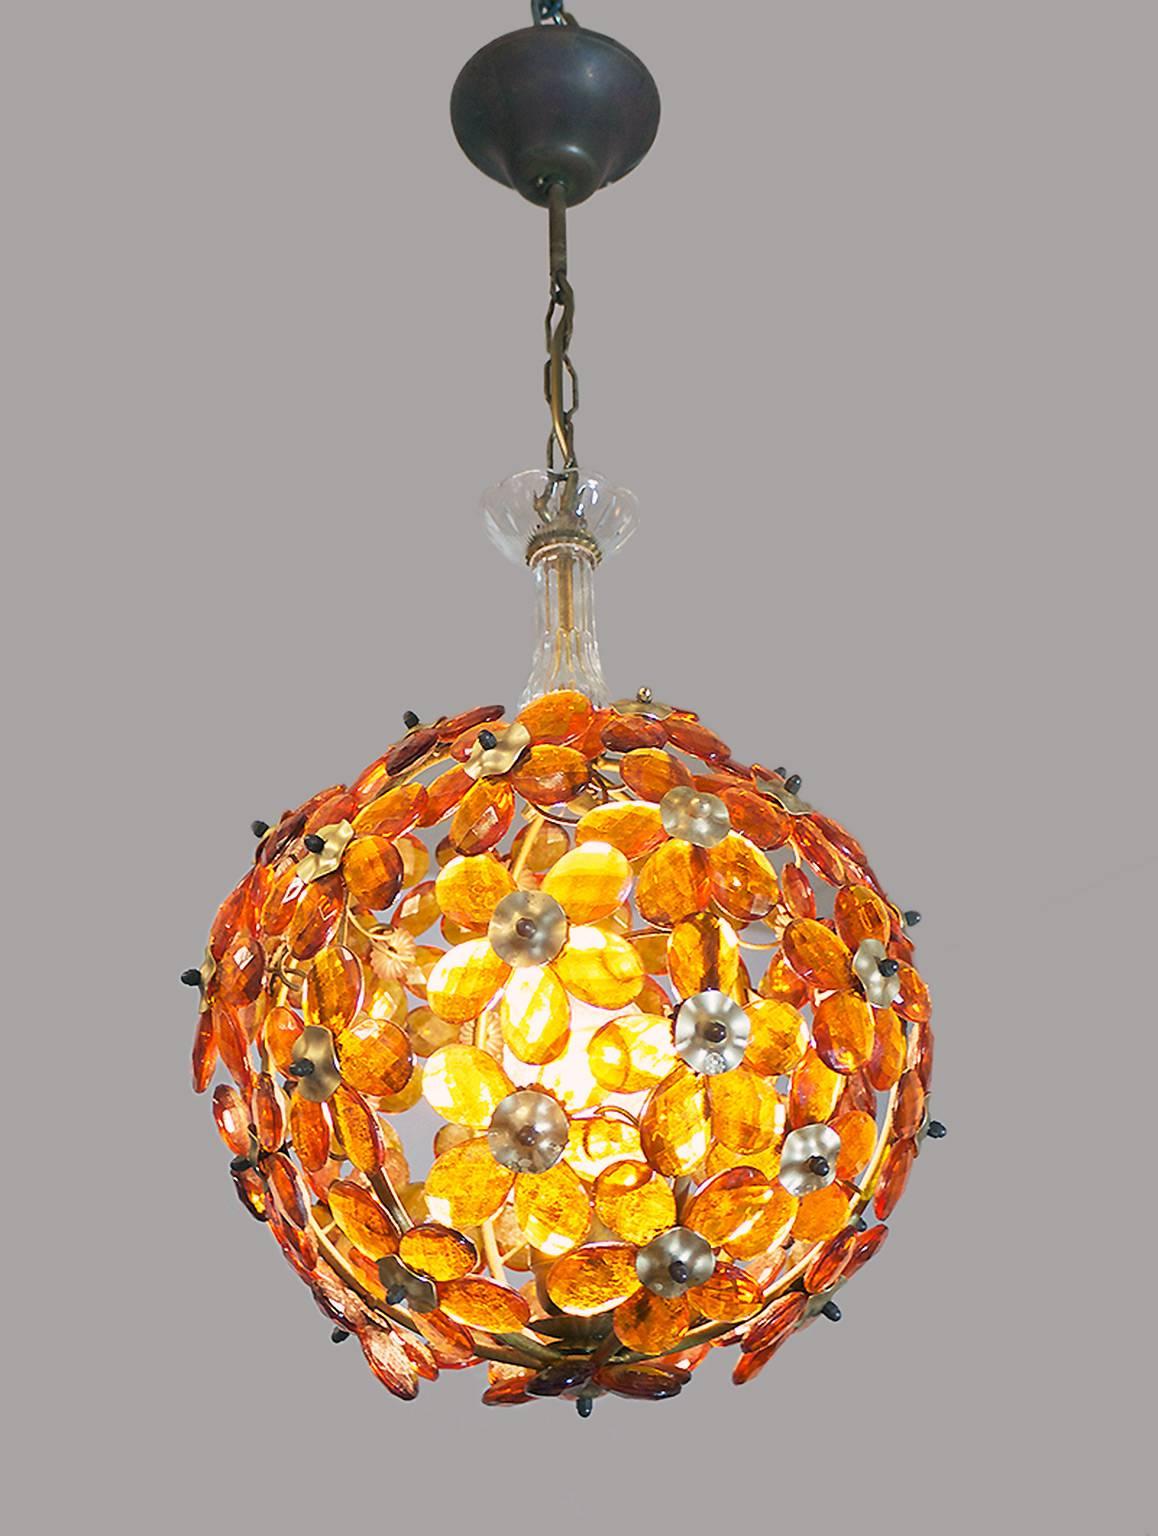 Elegant mid century globe chandelier with molded amber glass flowers and leaves on a brass frame. Manufactured by Maison Bagues, France in the 1950s.

Lighting: takes one large Edison E27 base screw bulb. 
Wattage: we recommend up to 75w per bulb.